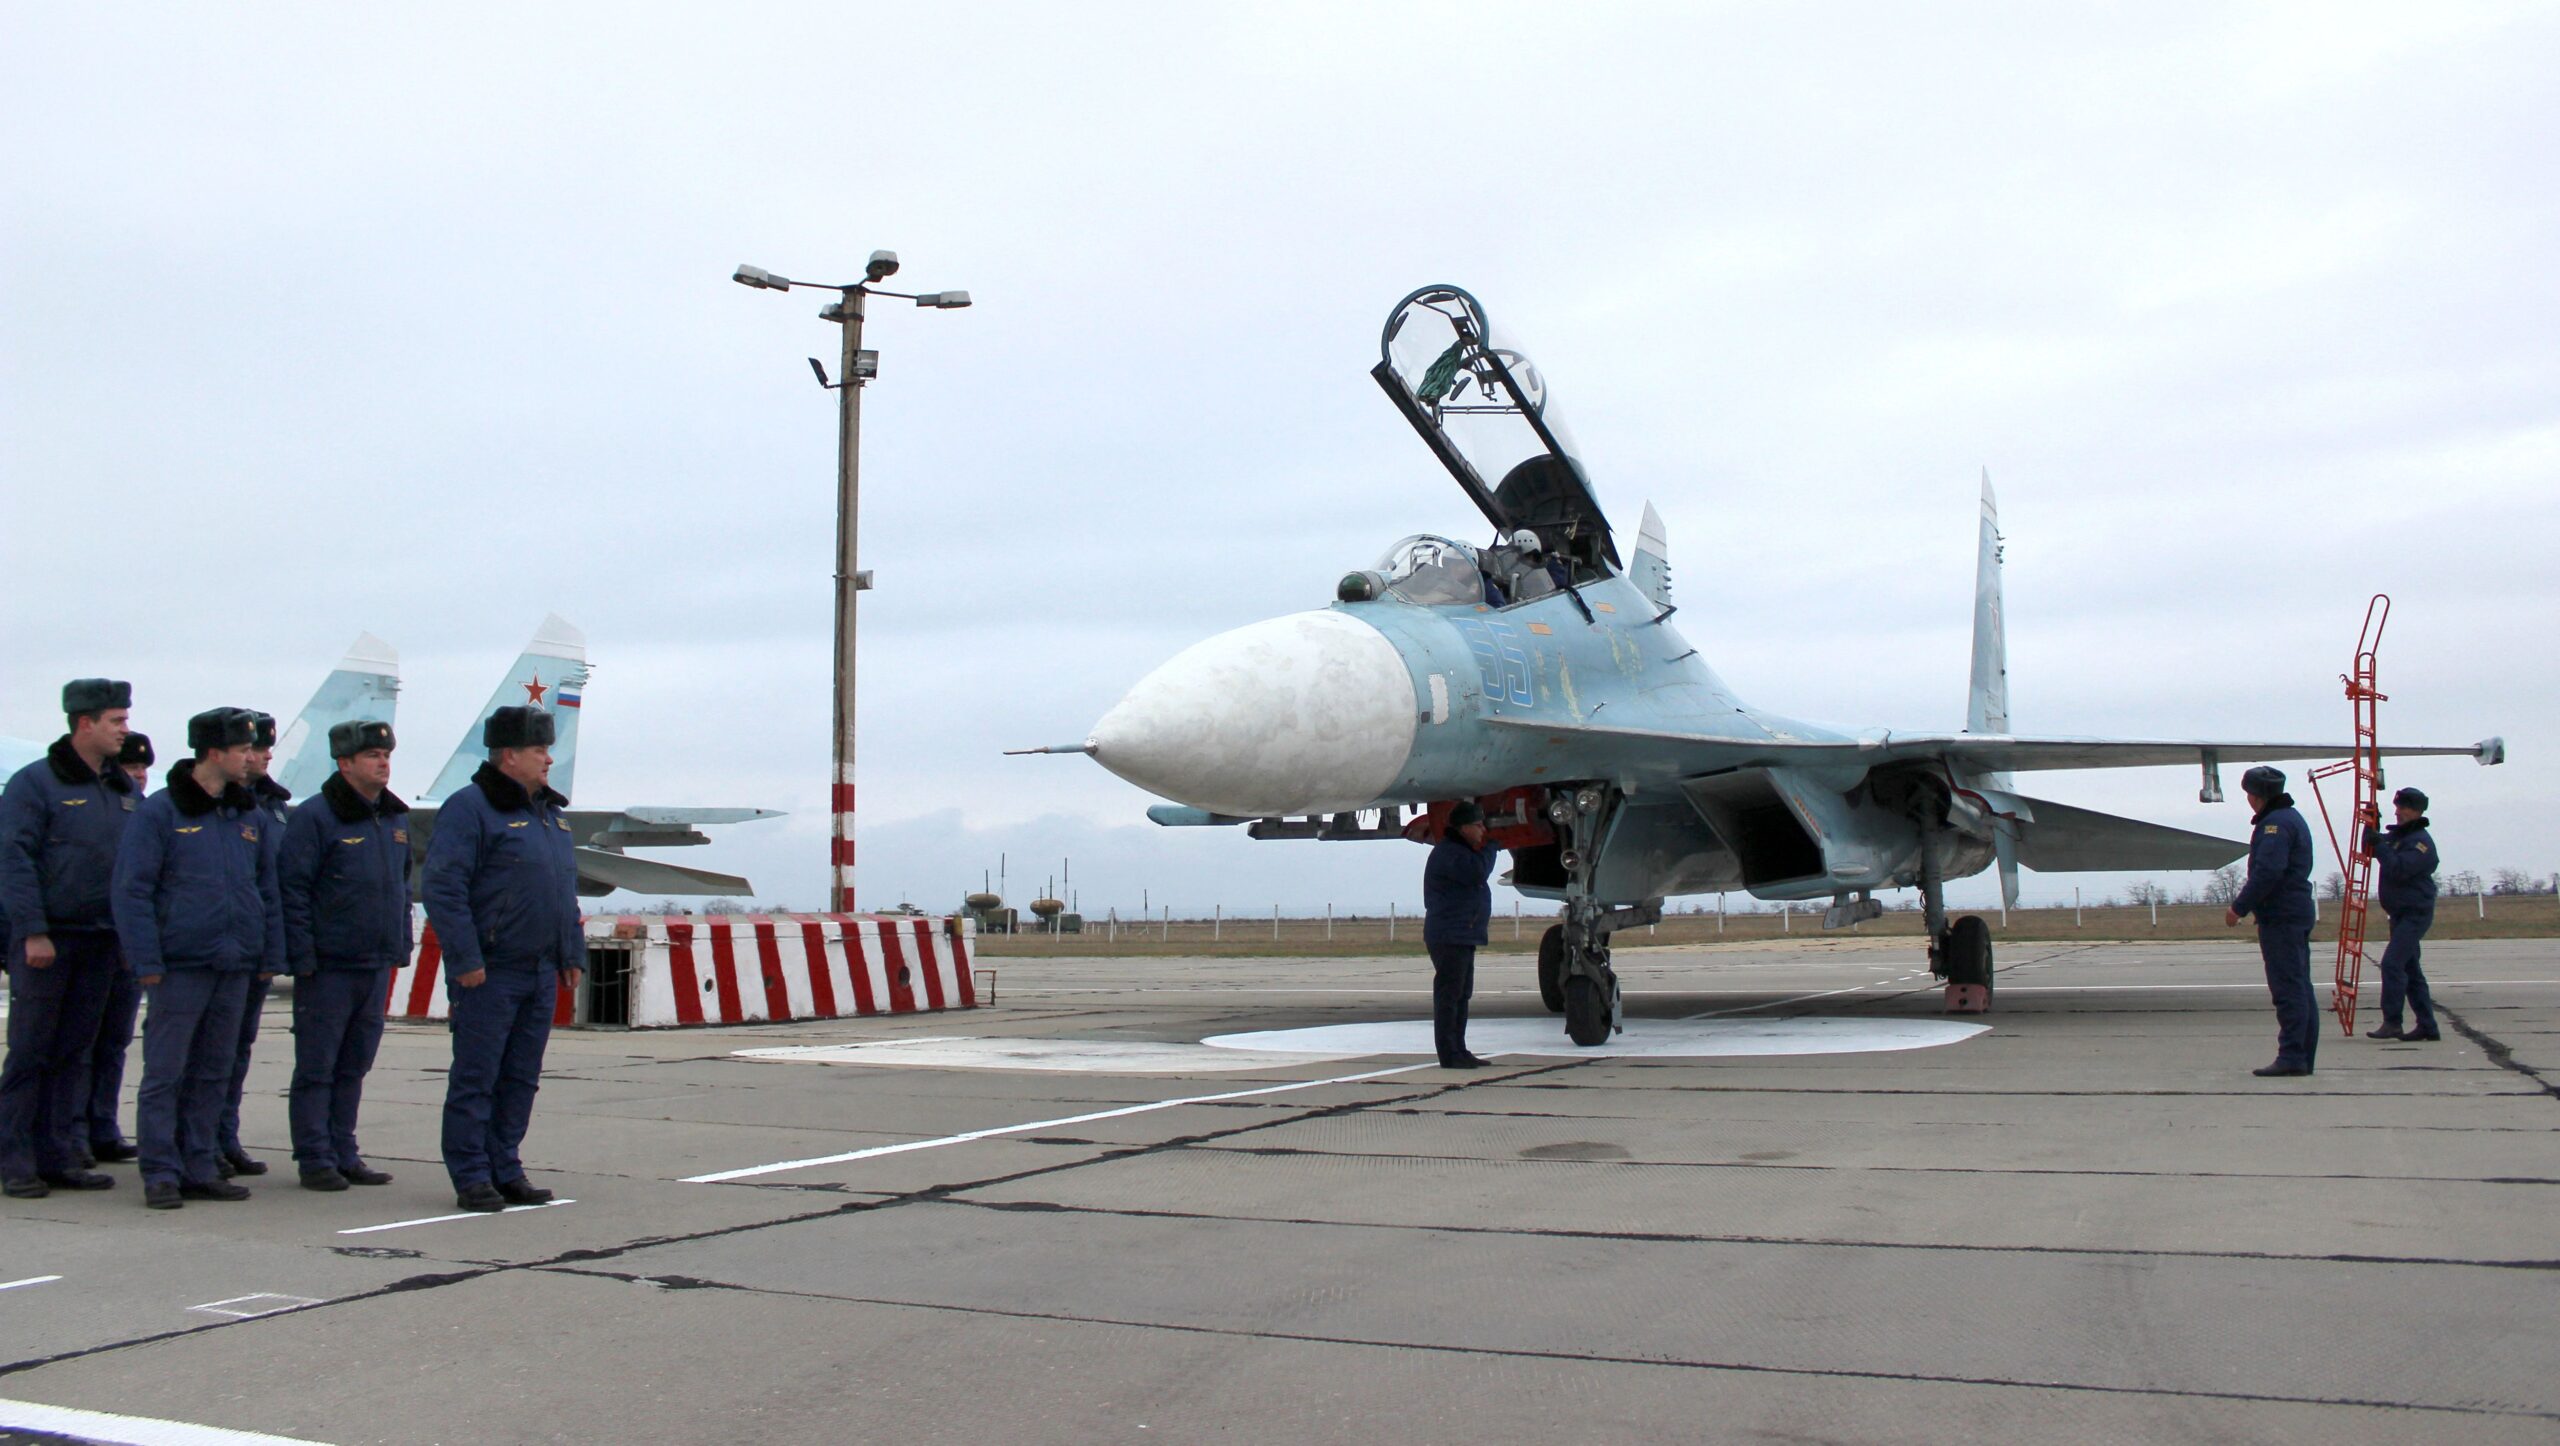 A Russian Su-27 SM fighter jet lands on the airfield of Belbek military airport outside Sevastopol on November 26, 2014. Crimean military air forces were reinforced by ten Russian SU-27 SM and four SU-30 fighter jets today. NATO's top military commander warned Wednesday that Russia's "militarisation" of the annexed Crimea peninsula could be used by Moscow to exert control across the whole Black Sea region. AFP PHOTO / YURI LASHOV (Photo by Yuriy LASHOV / AFP) (Photo by YURIY LASHOV/AFP via Getty Images)